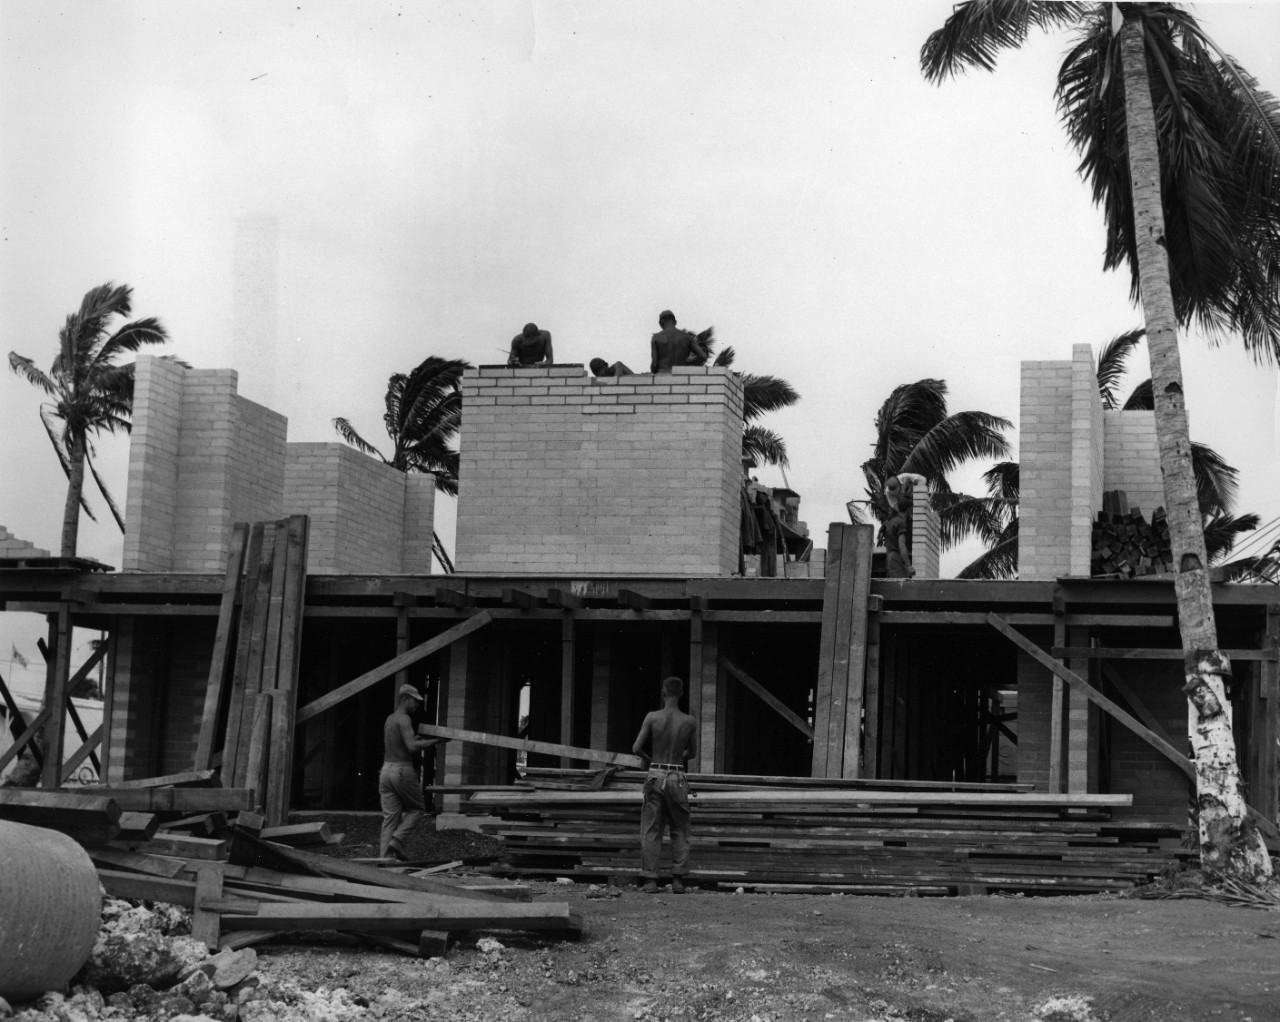 Up goes another housing unit on the Mariana Islands. This is one of many units being constructed at NAS by Mobile Construction Battalion 10 Seabees.